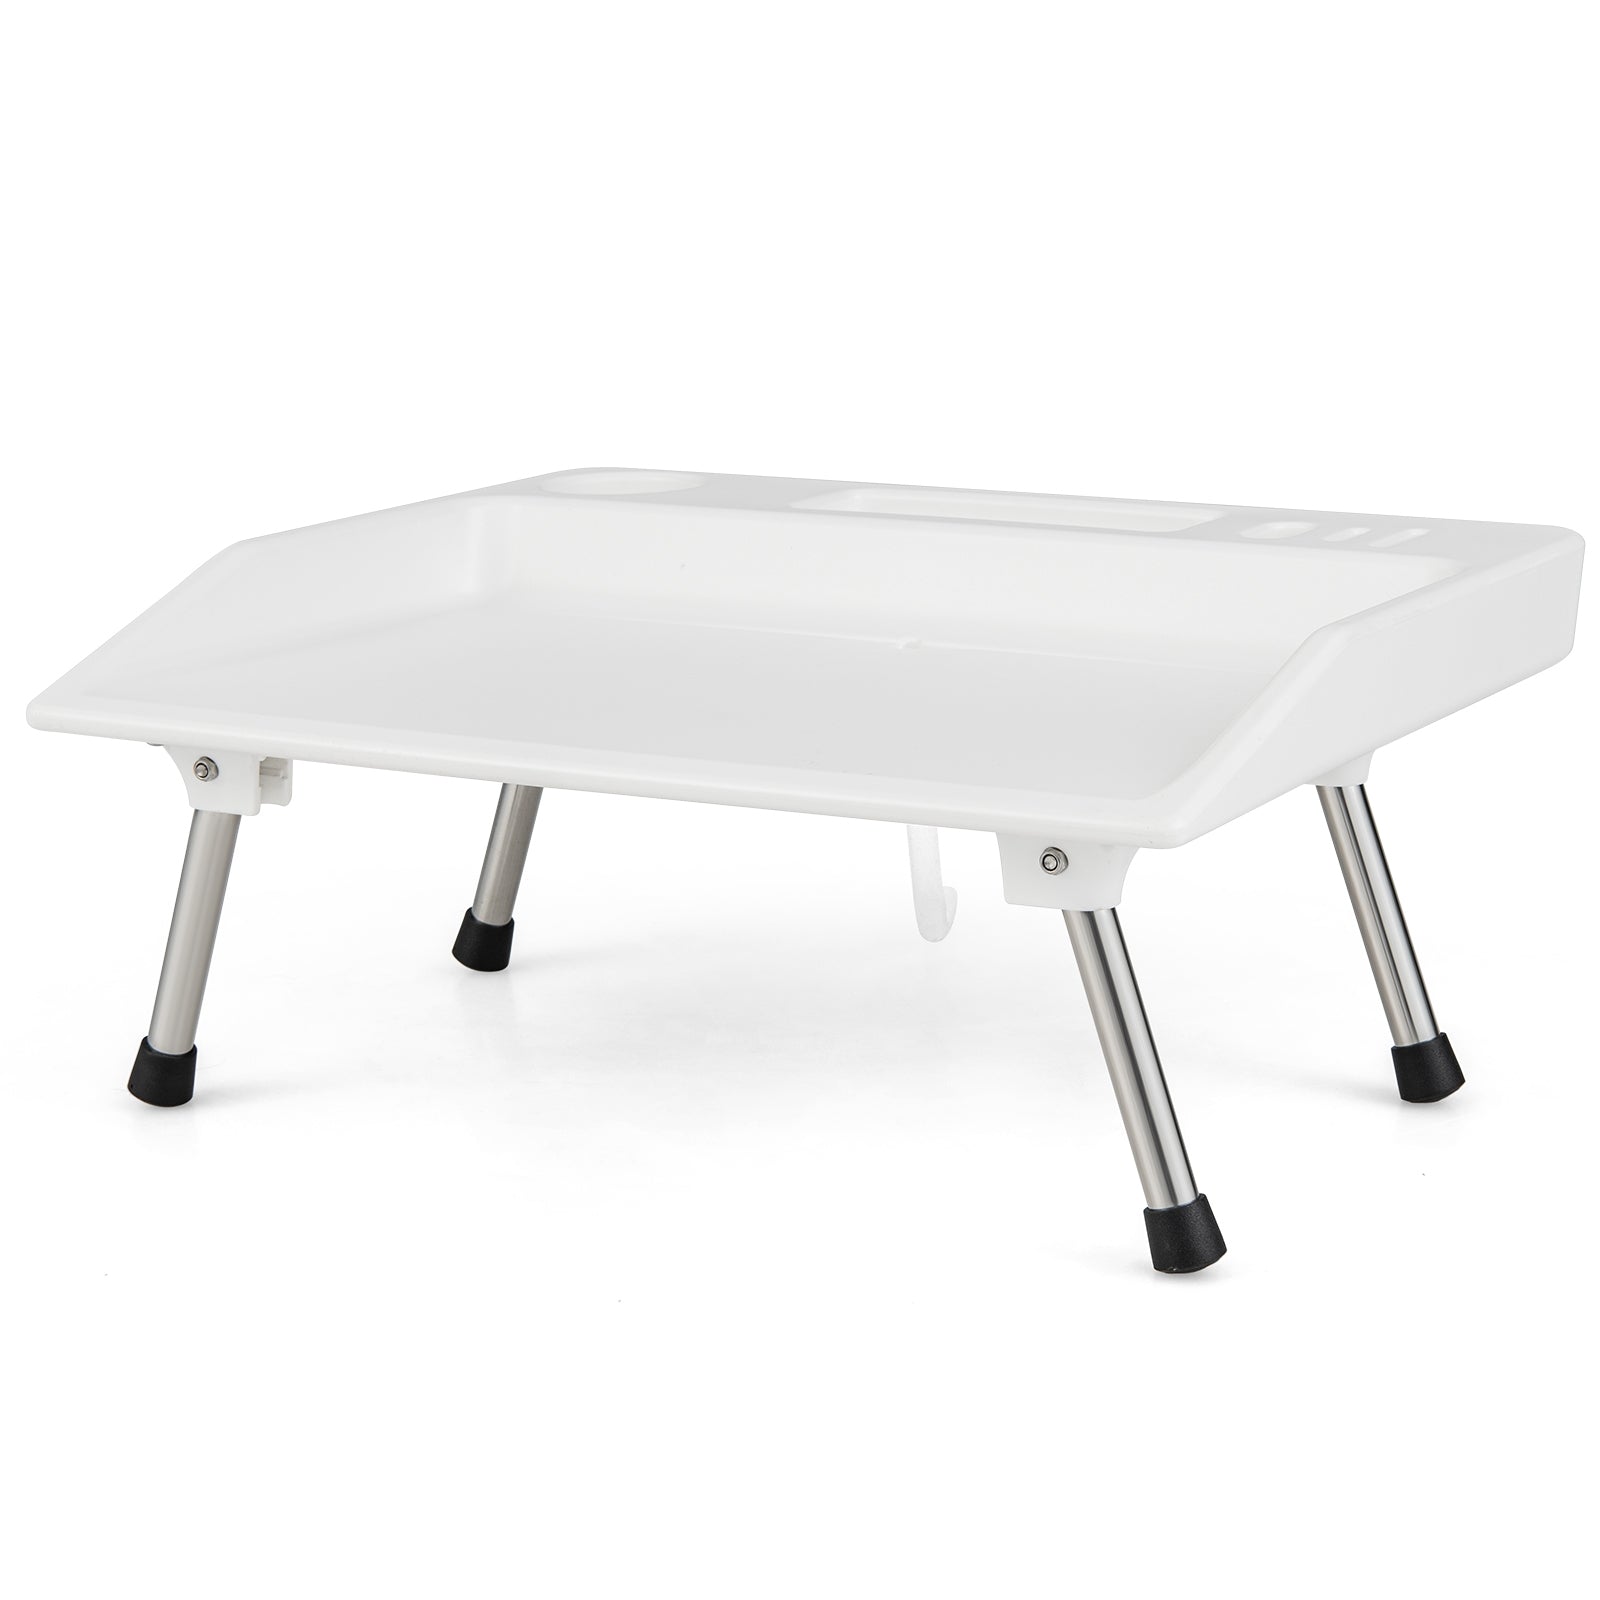 Folding Fish Fillet Table Portable Fish Cleaning and Cutting Table with Knife Slots, White - Gallery Canada